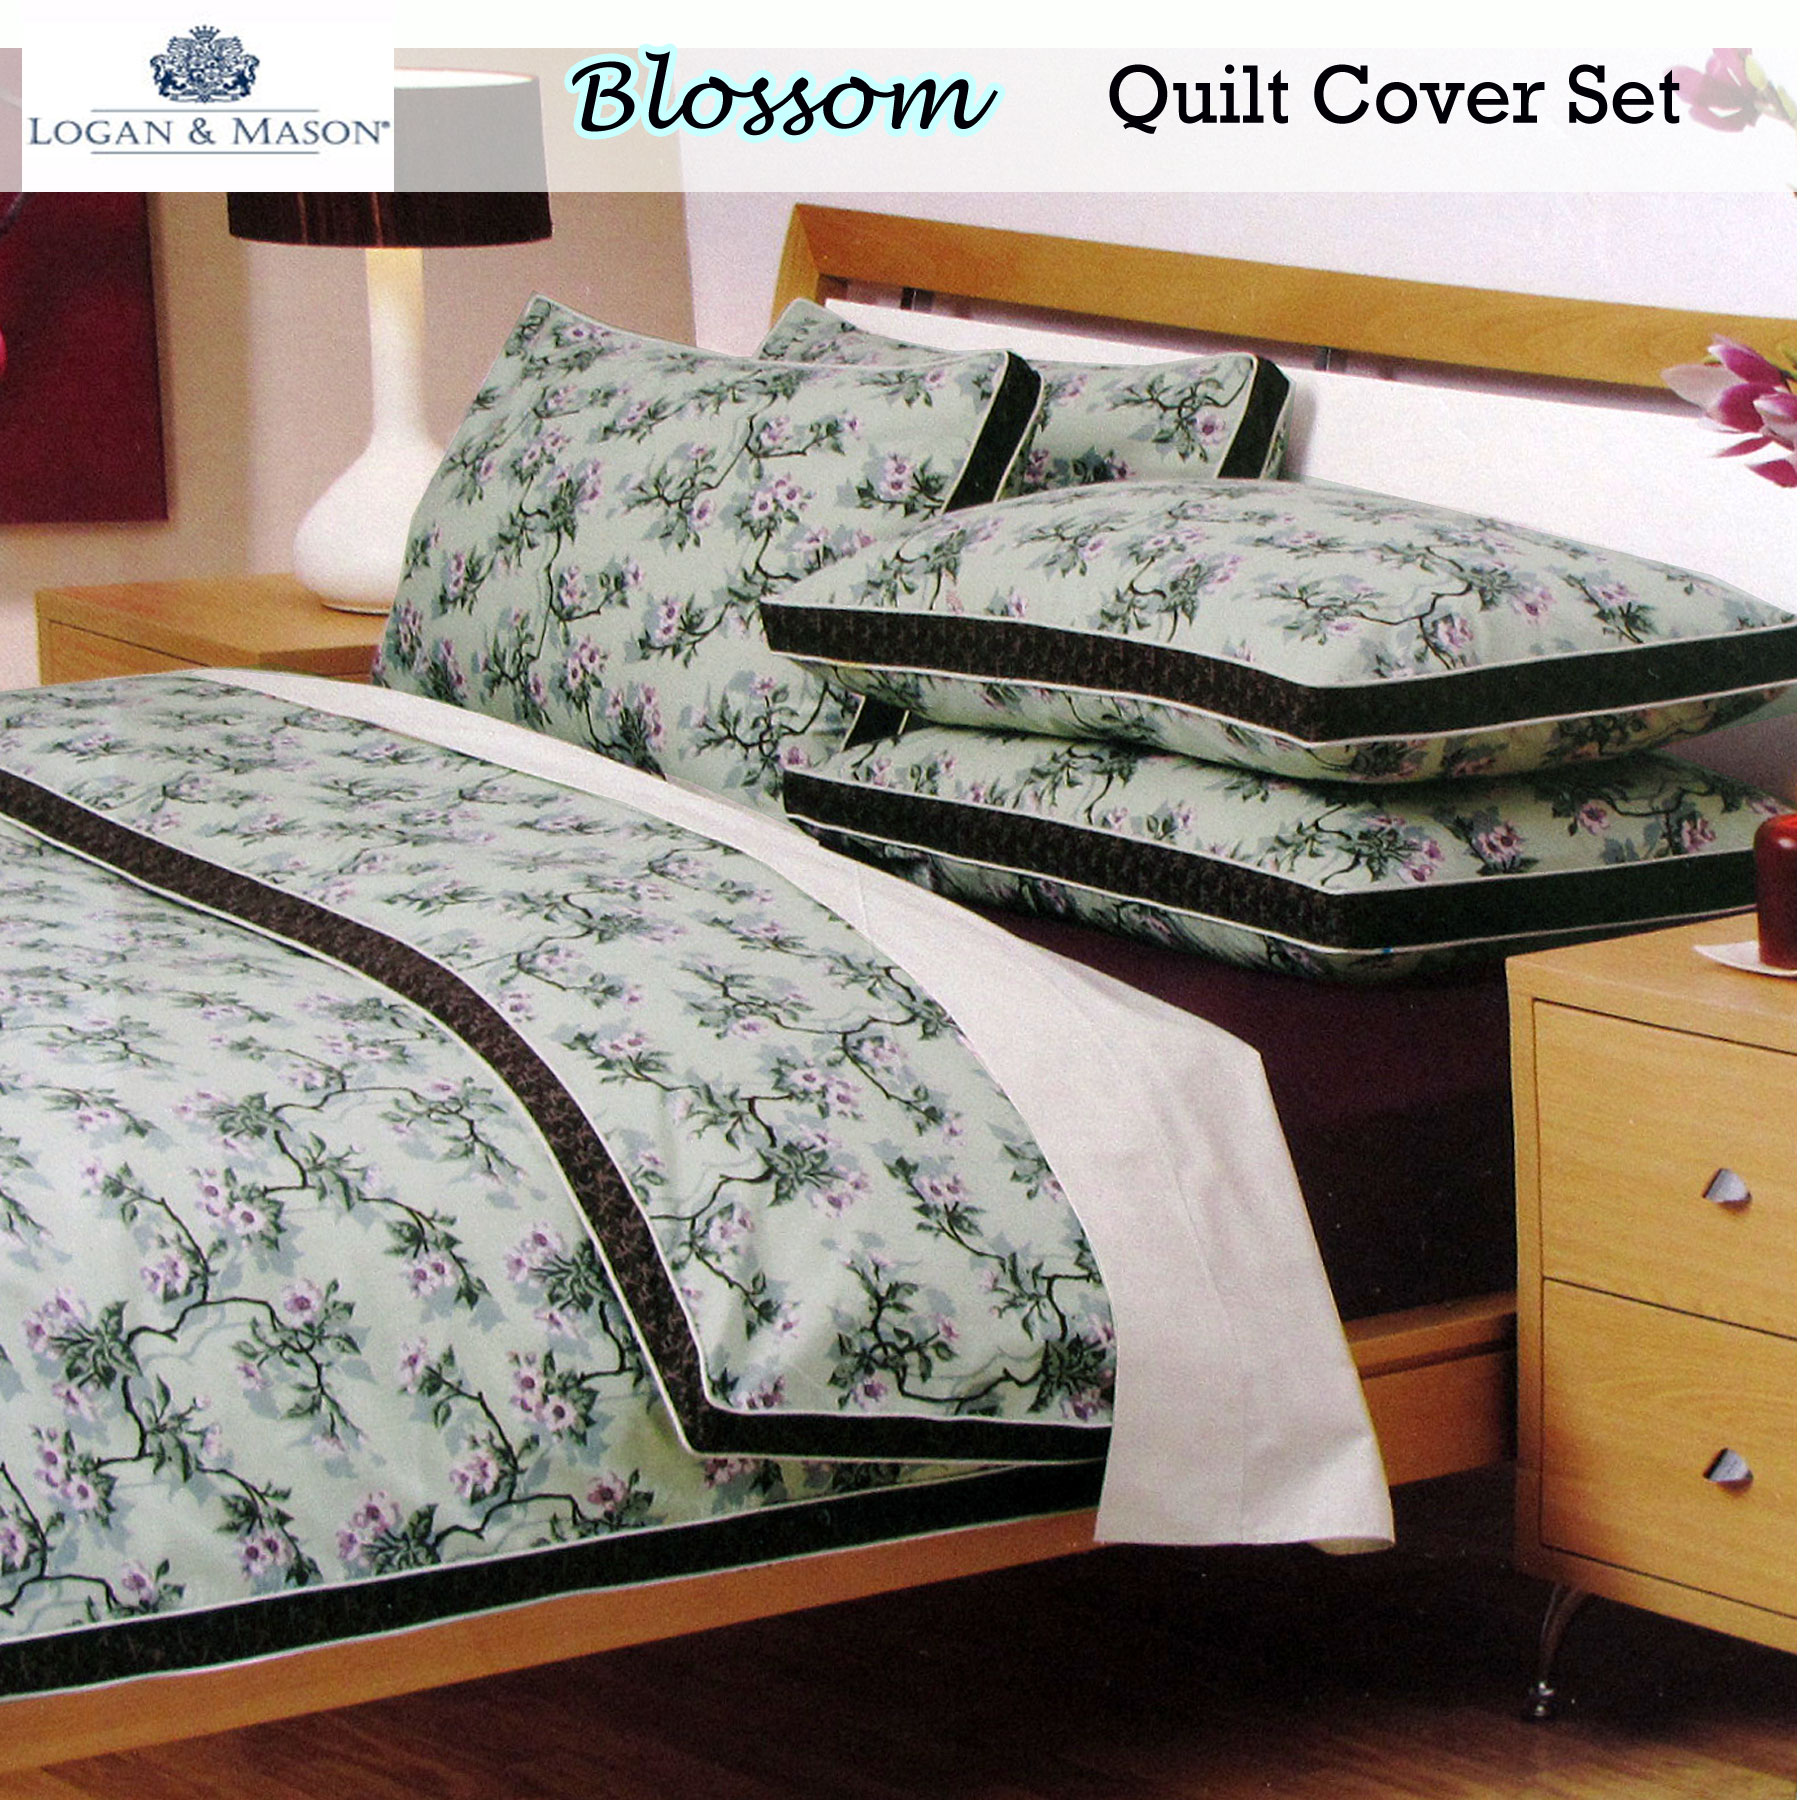 By 3 Duvet Set Doona Quilt Green Mason Blossom Cover Sage Pce